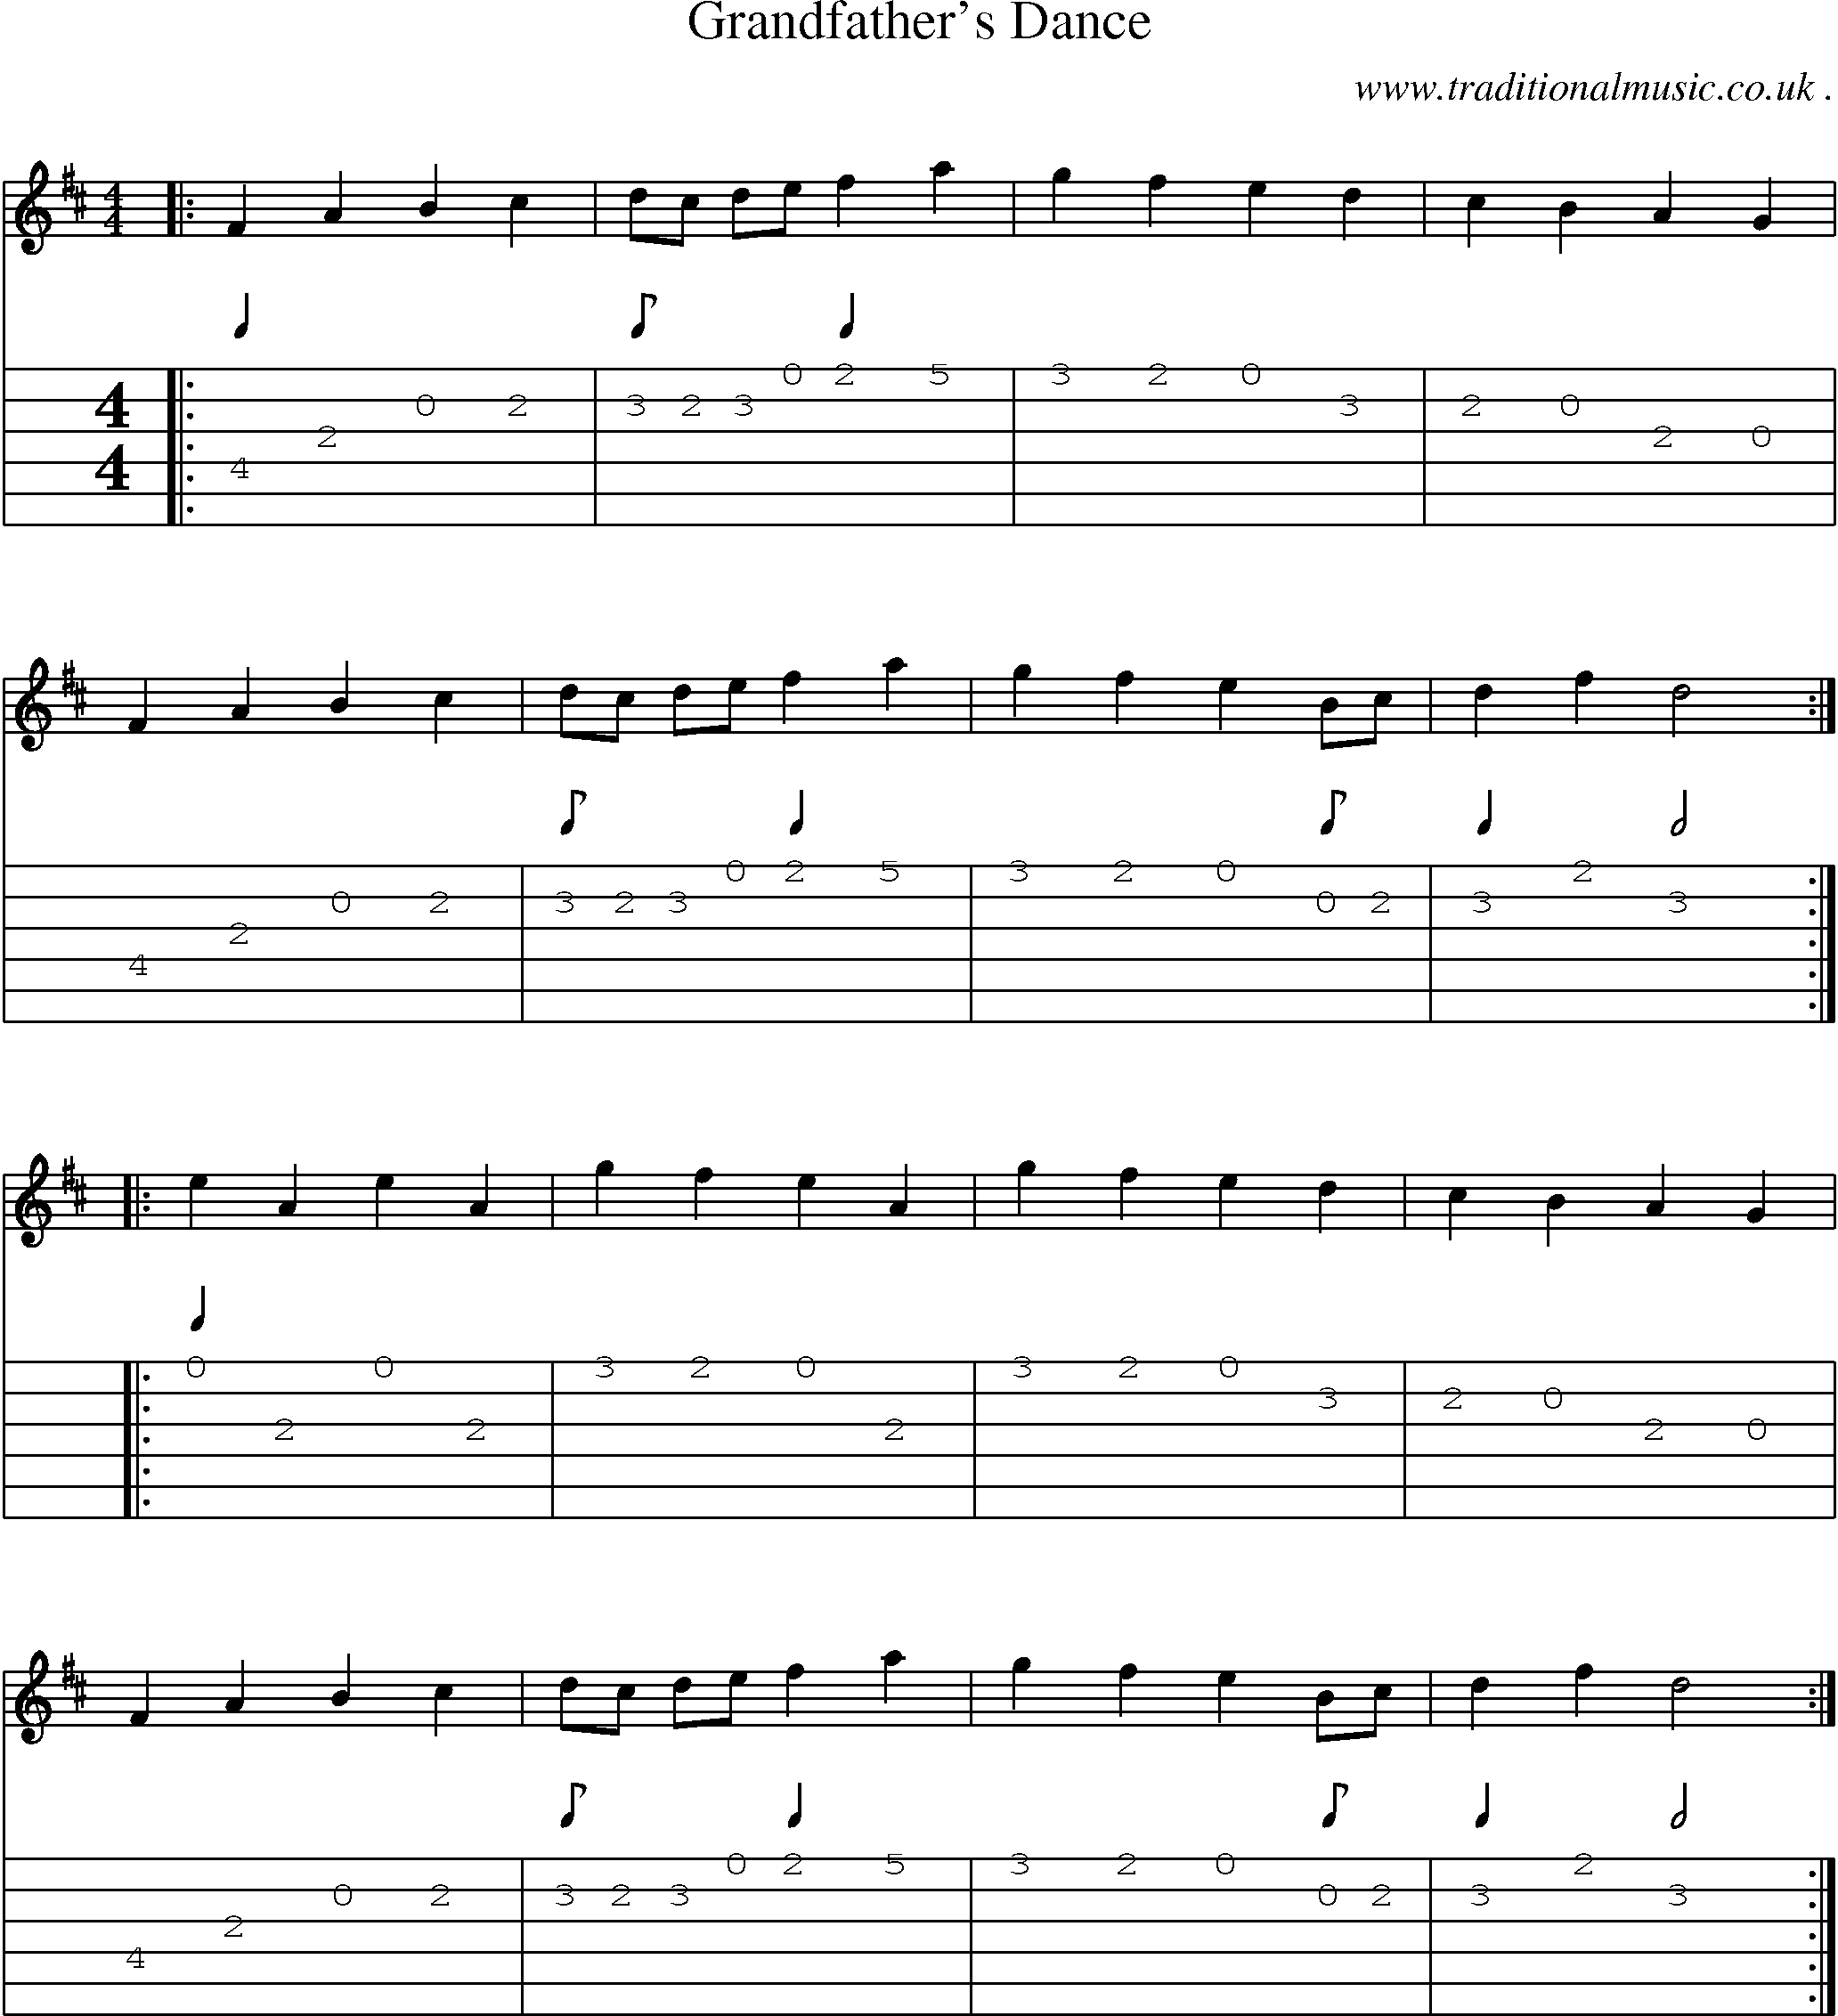 Sheet-Music and Guitar Tabs for Grandfathers Dance